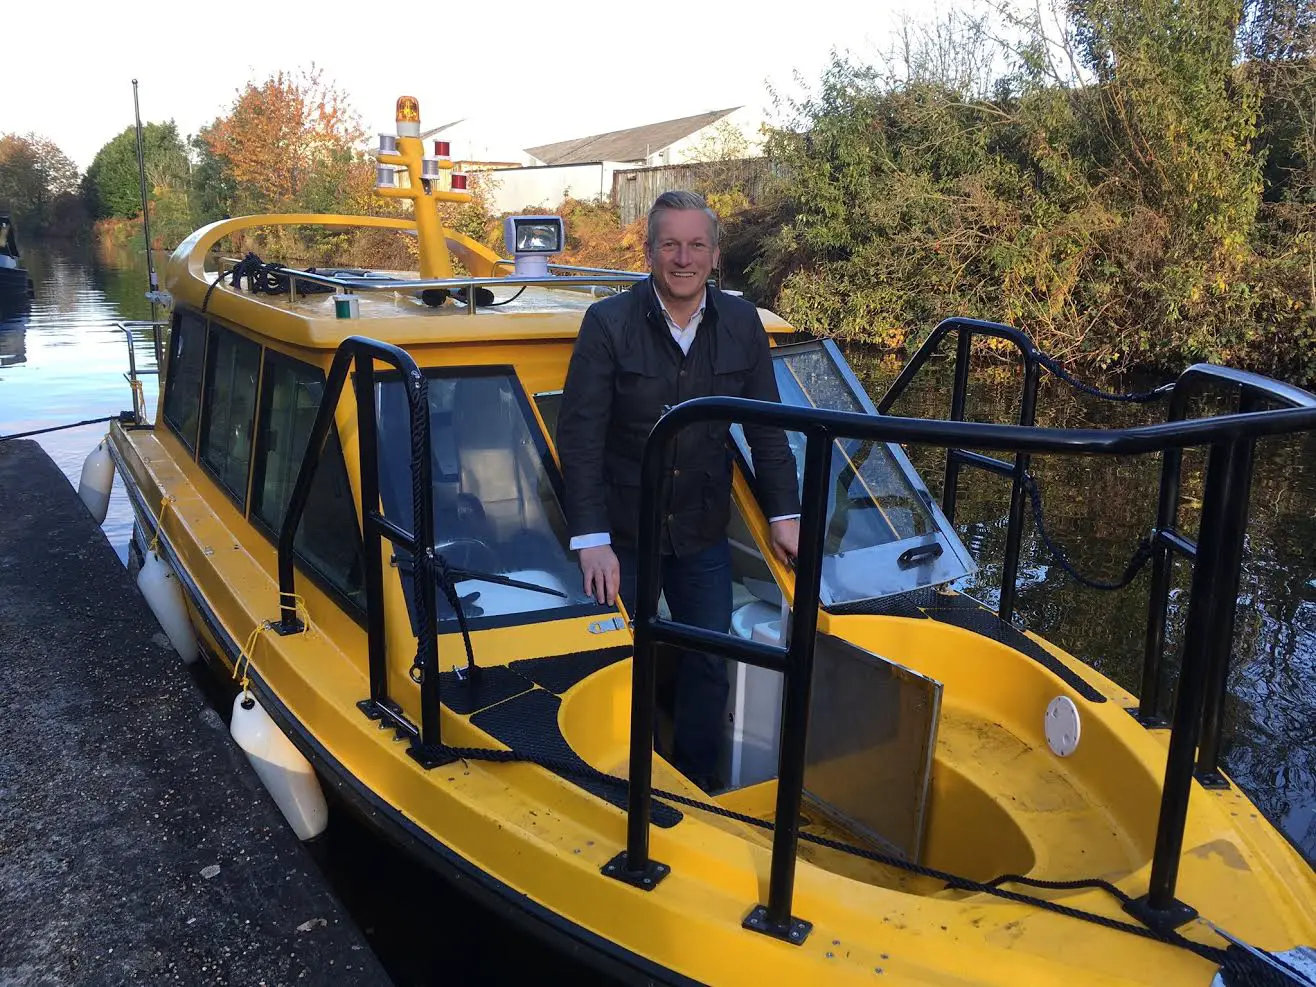 Entrepreneur Steven Cadwell with one of the new water taxis